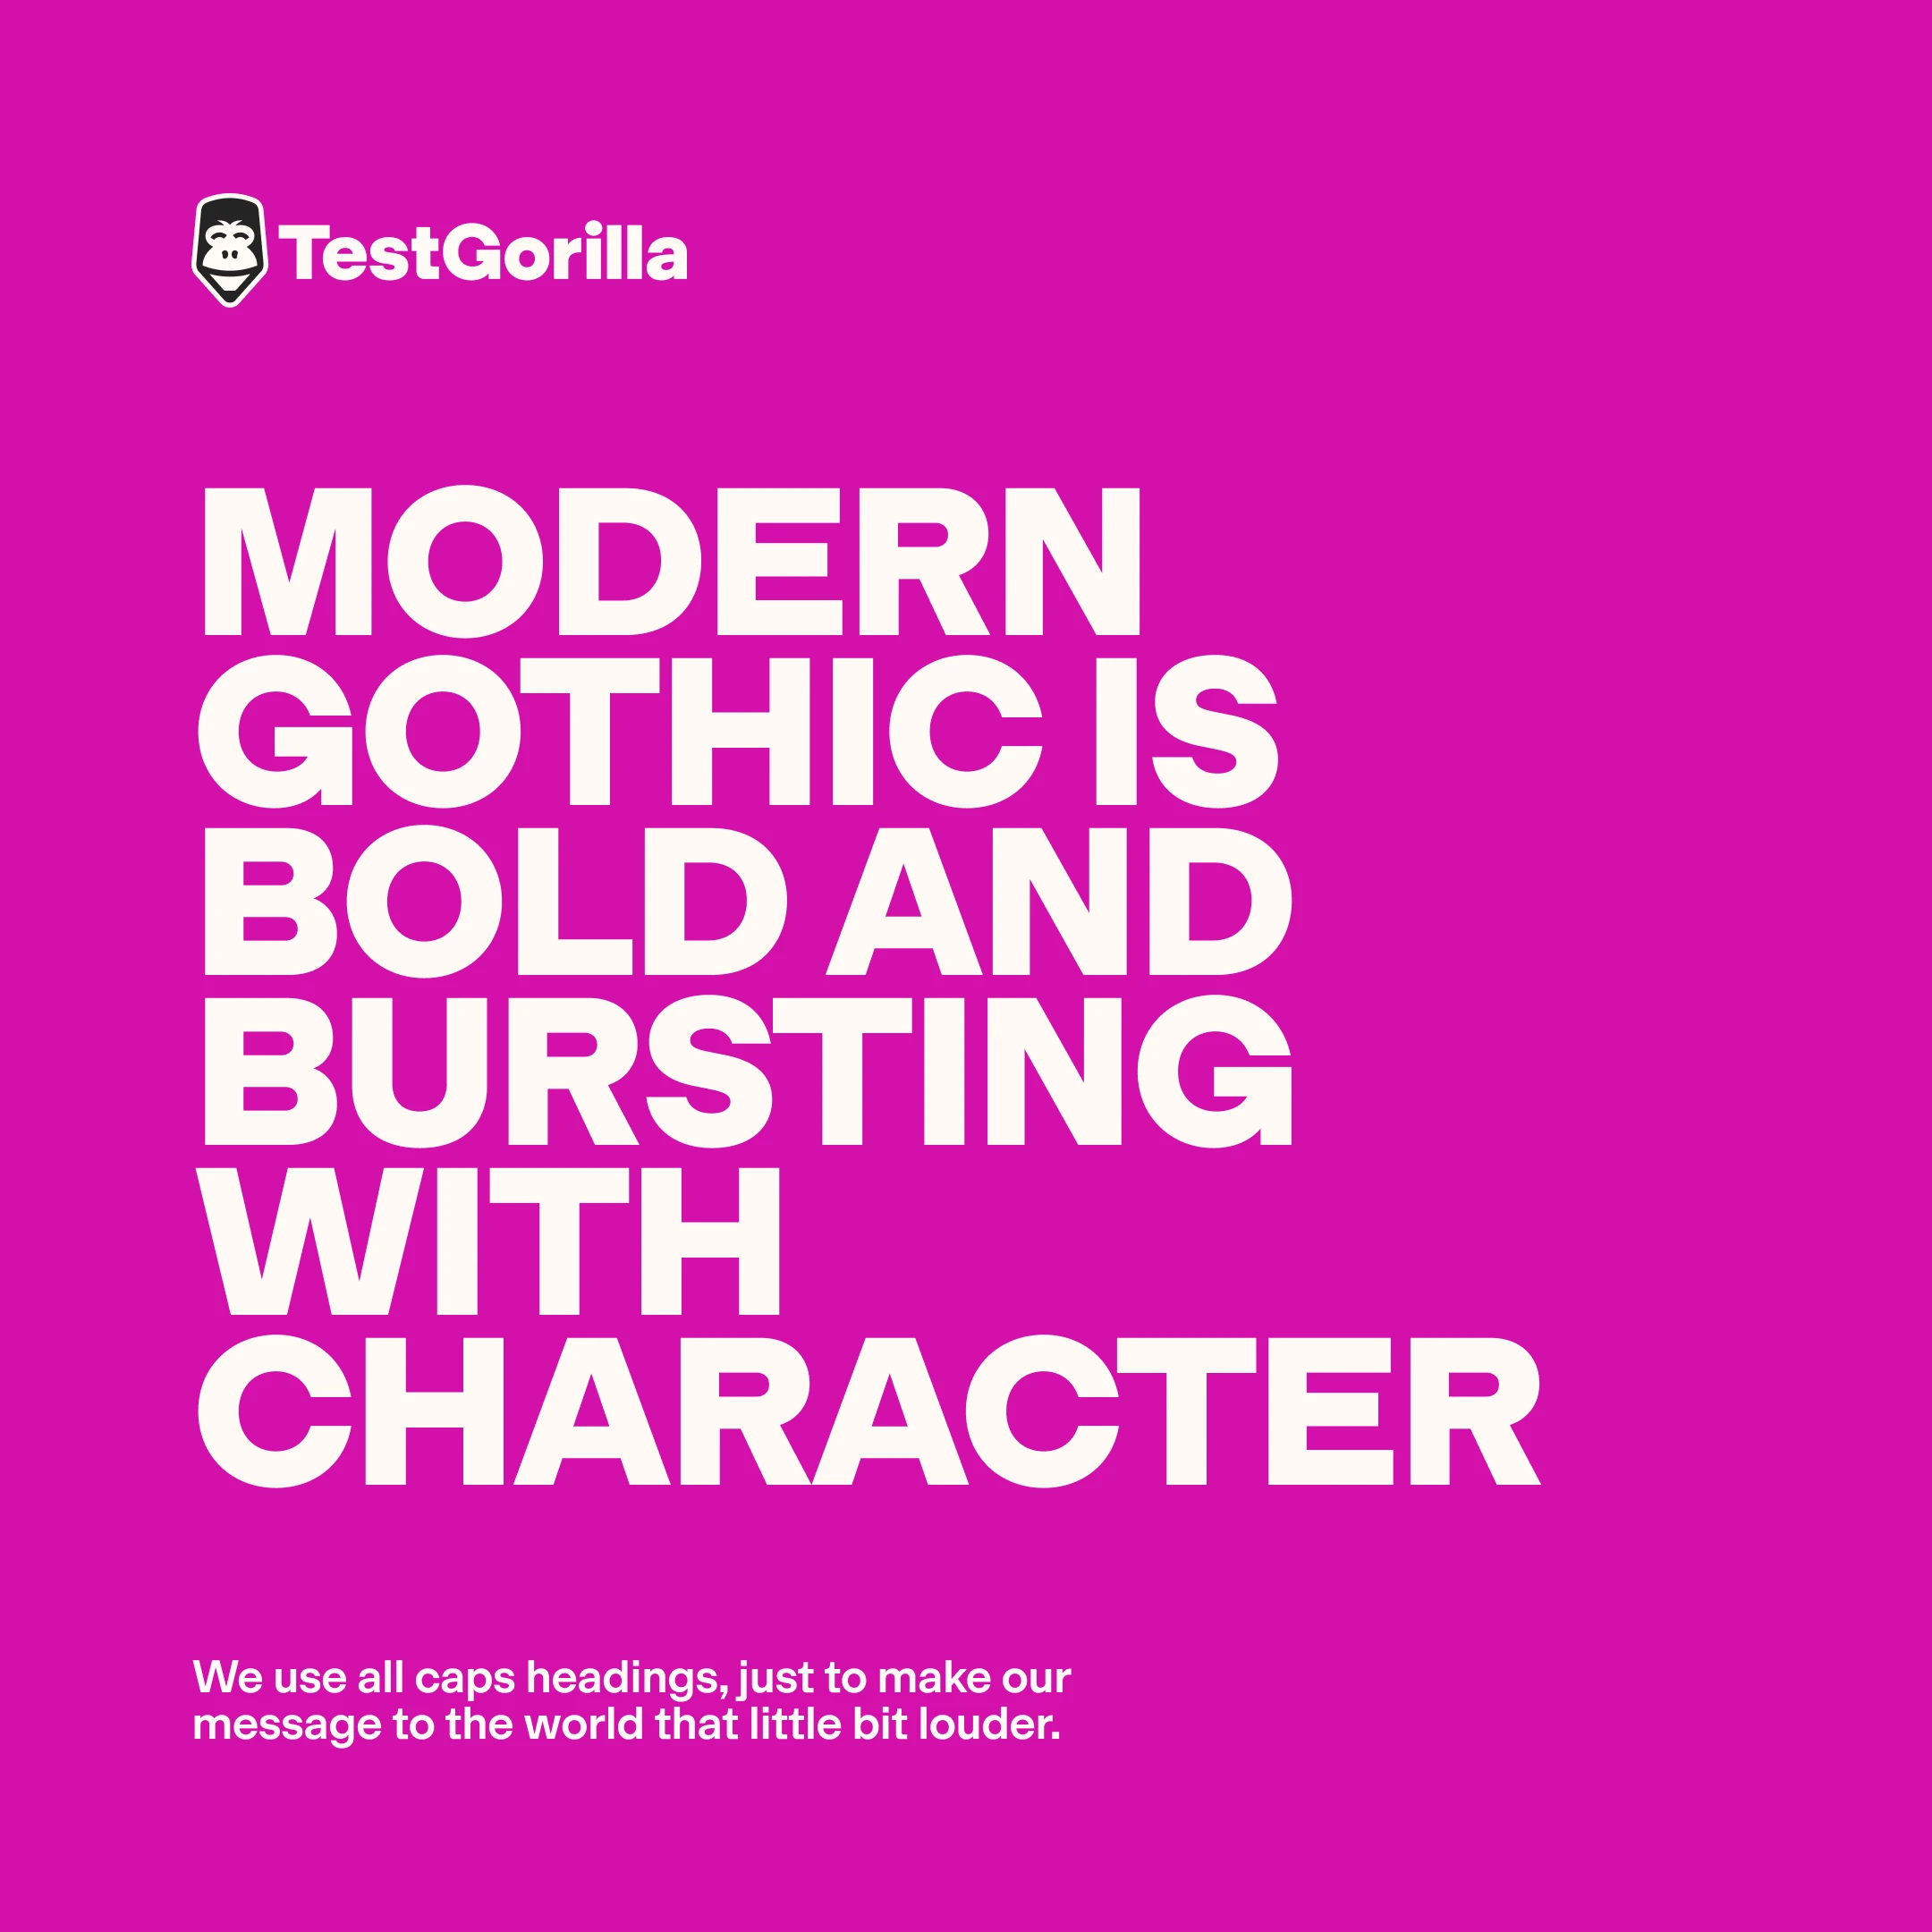 Modern Gothic is bold and bursting with character